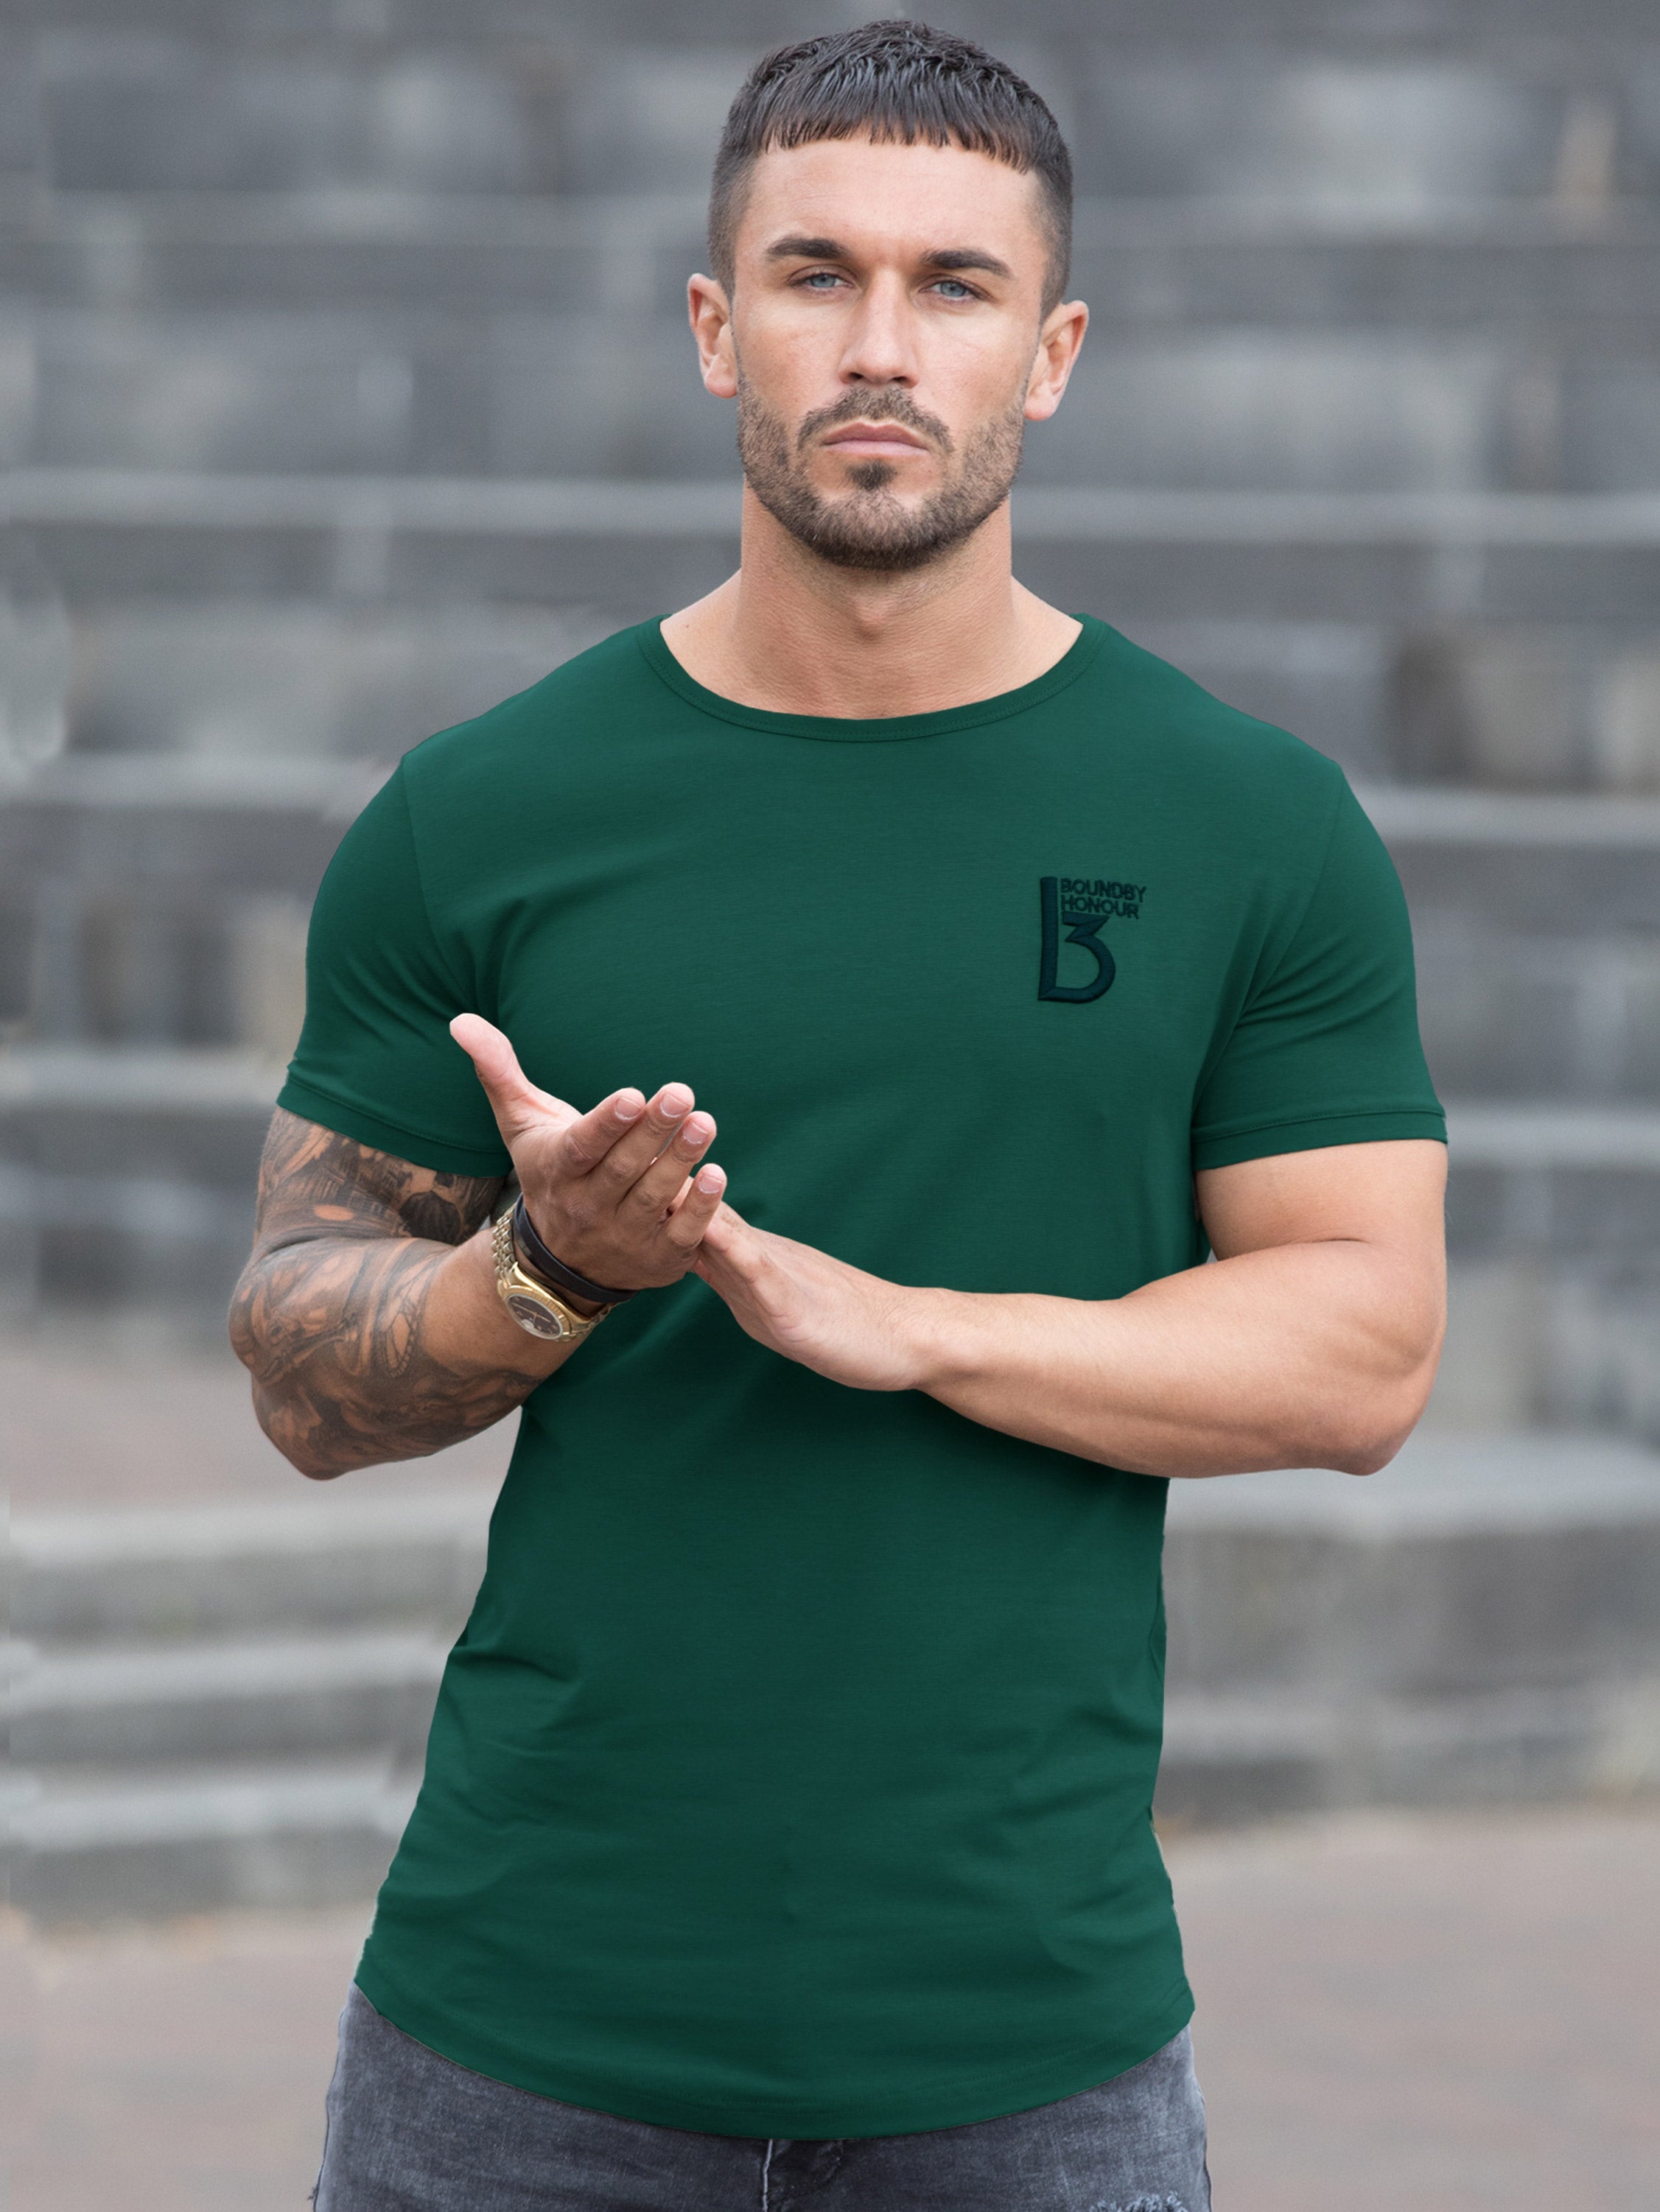 BH Men's Branded Short Sleeve Athletic T-shirt | Bound By Honour